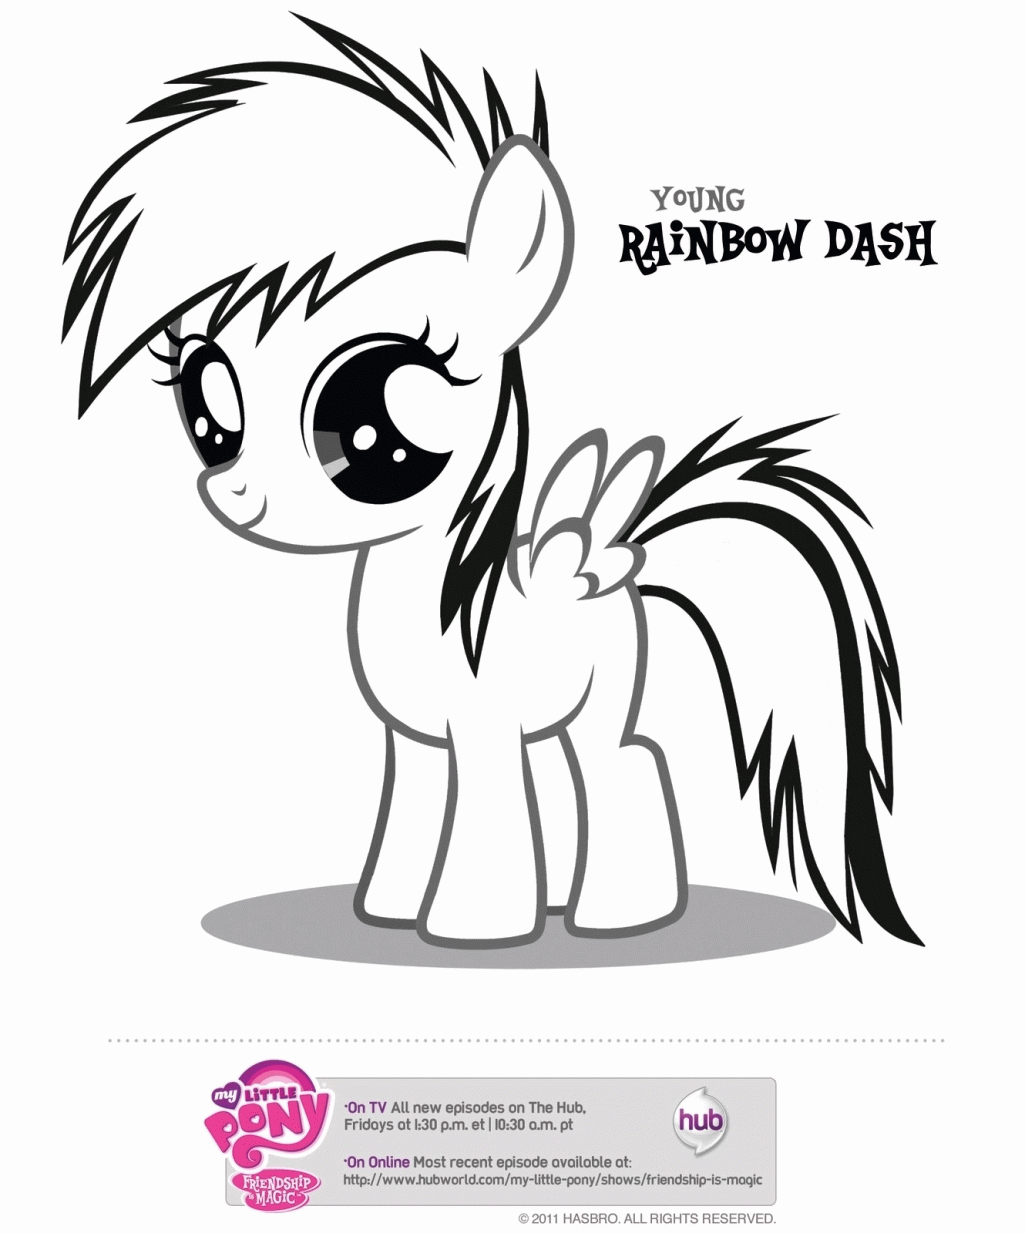 baby my little pony coloring pages - High Quality Coloring Pages